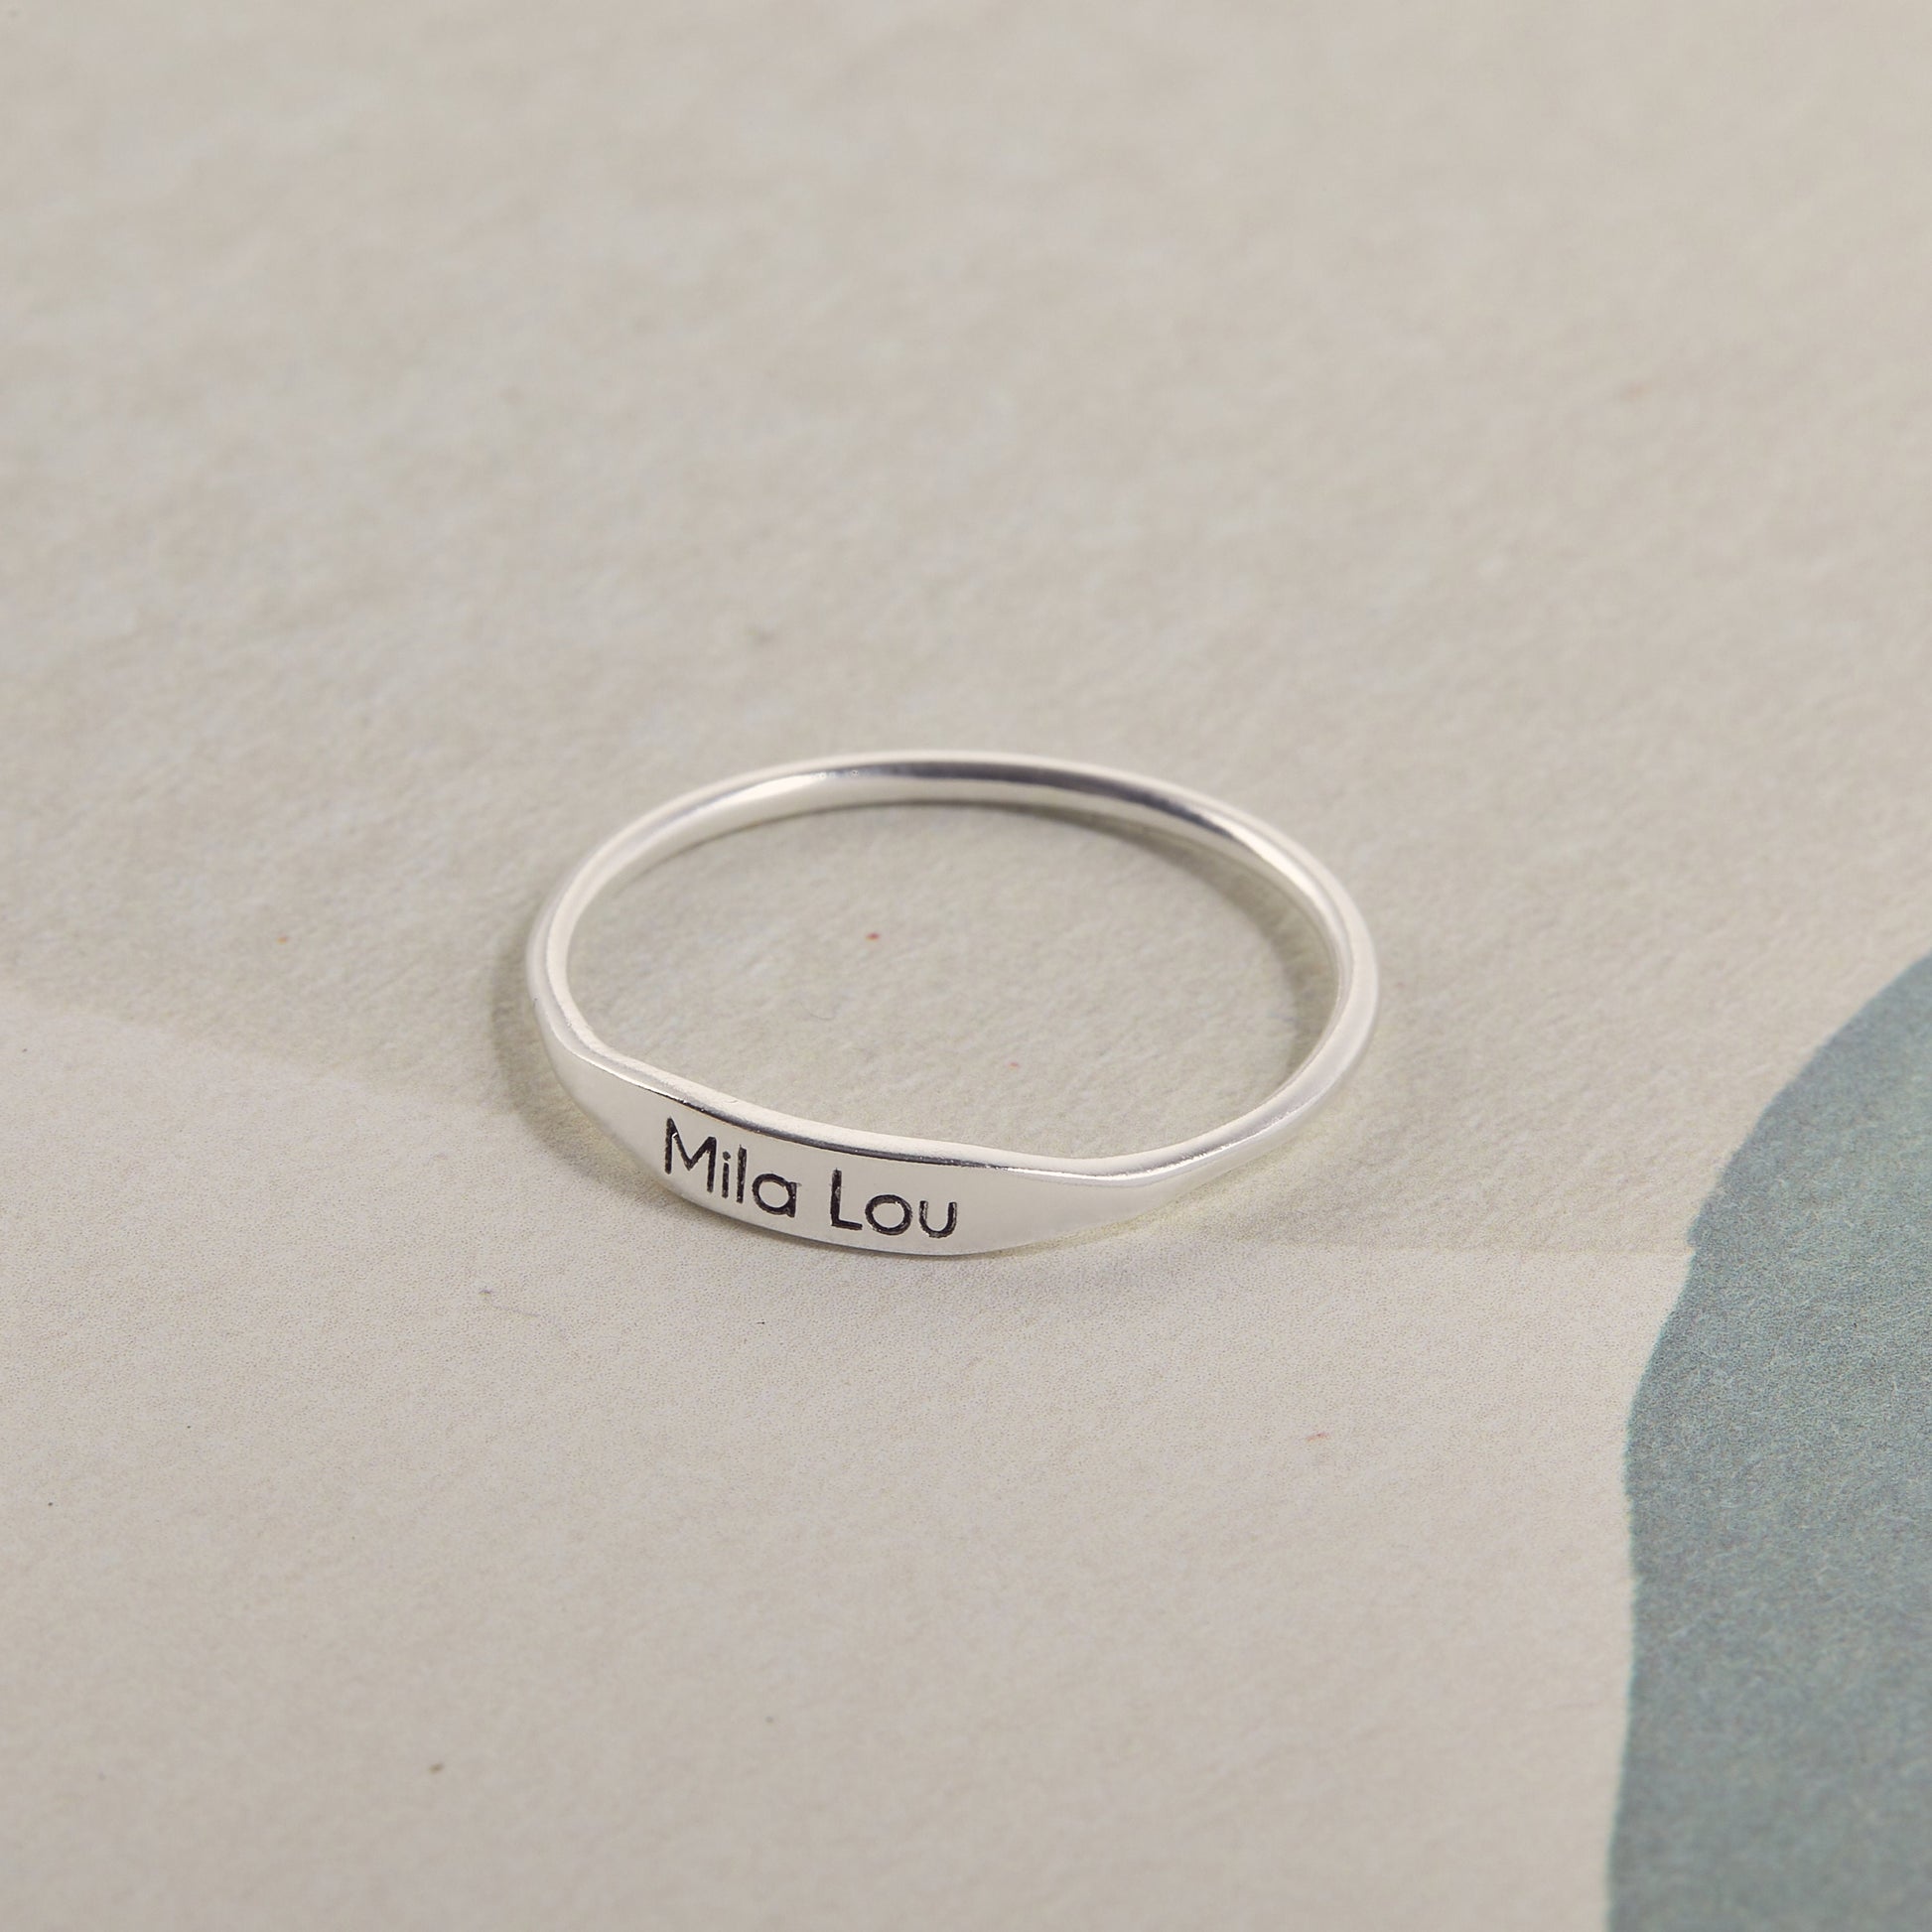 Personalized Dainty Ring | Custom Name Ring | Promise Silver Ring | Thin Stackable Ring | Stacking Ring | Family Ring | Minimalist Ring